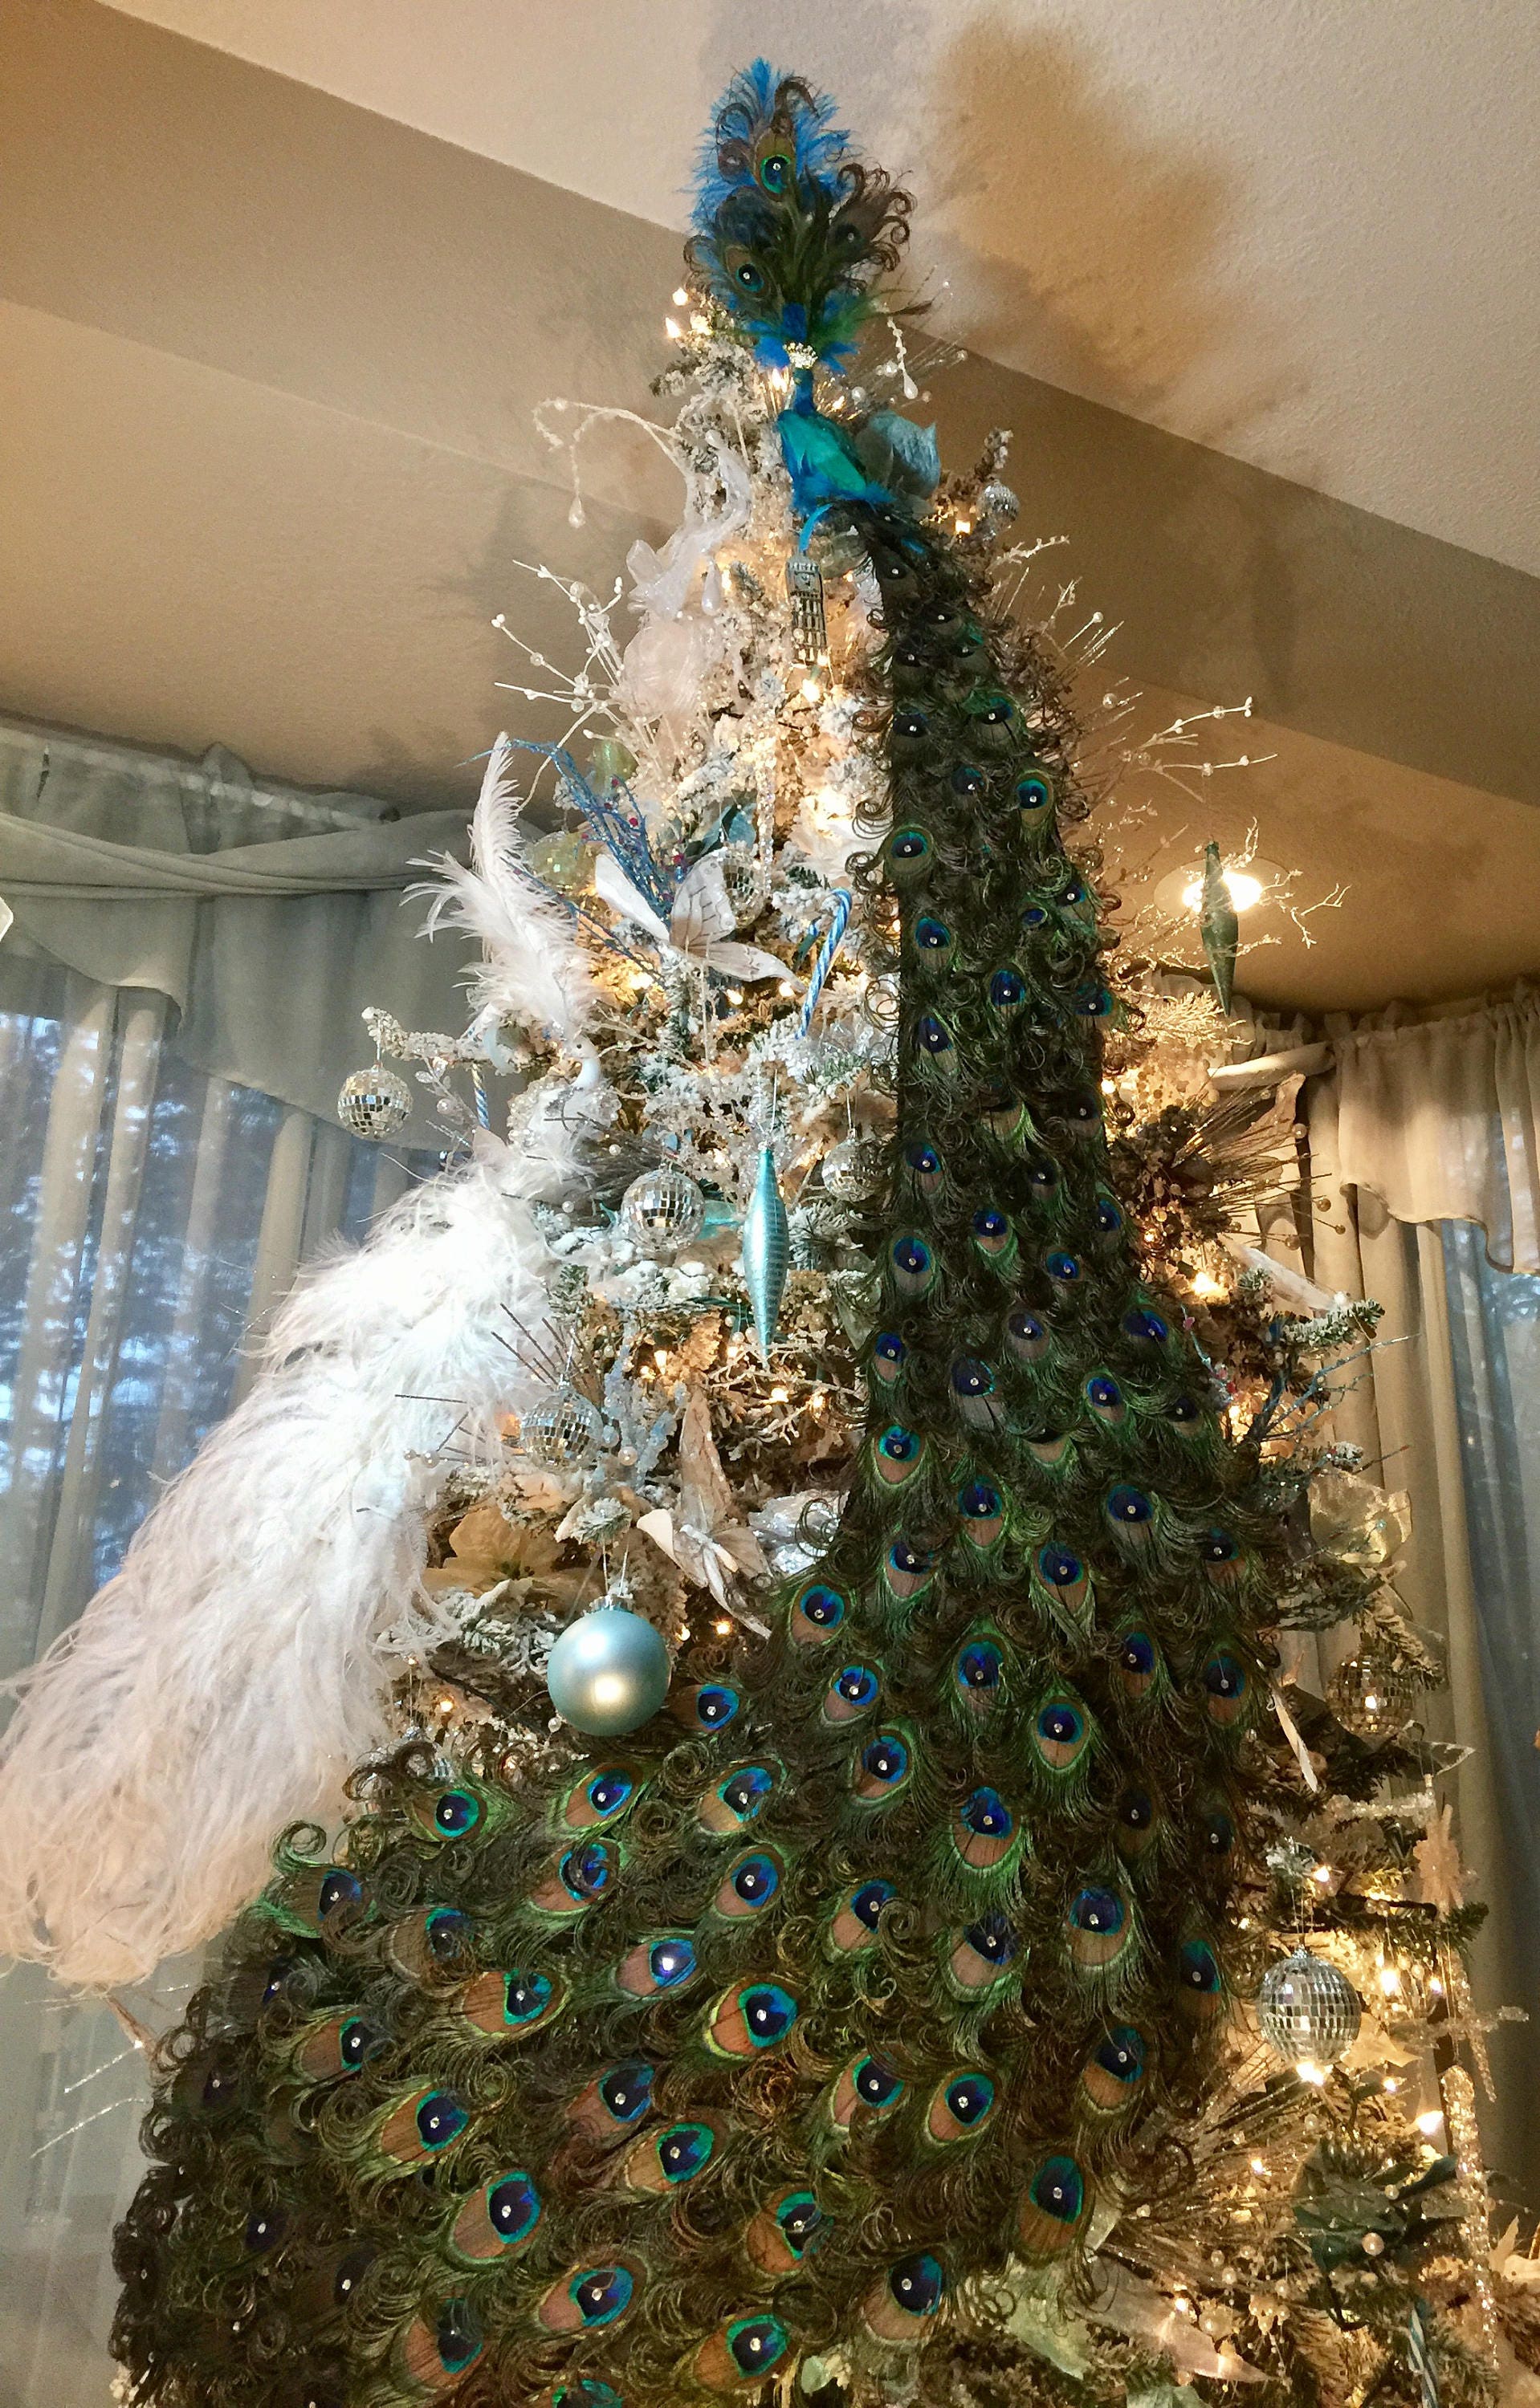 Finished the peacock themed tree, crowned with a life sized